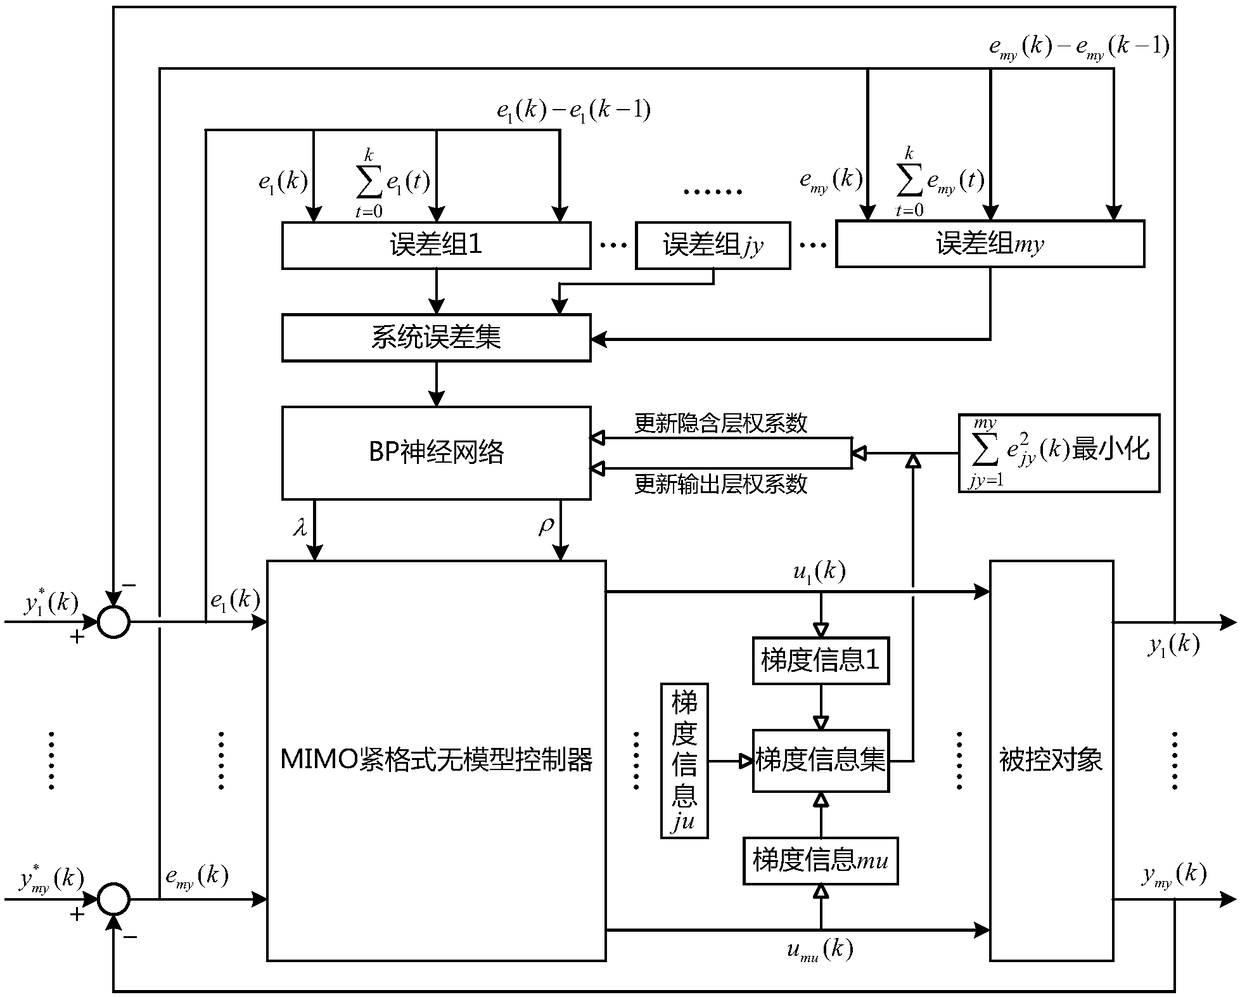 System-error-based parameter self-setting method of MIMO (Multiple Input and Multiple Output) tight-format model-free controller